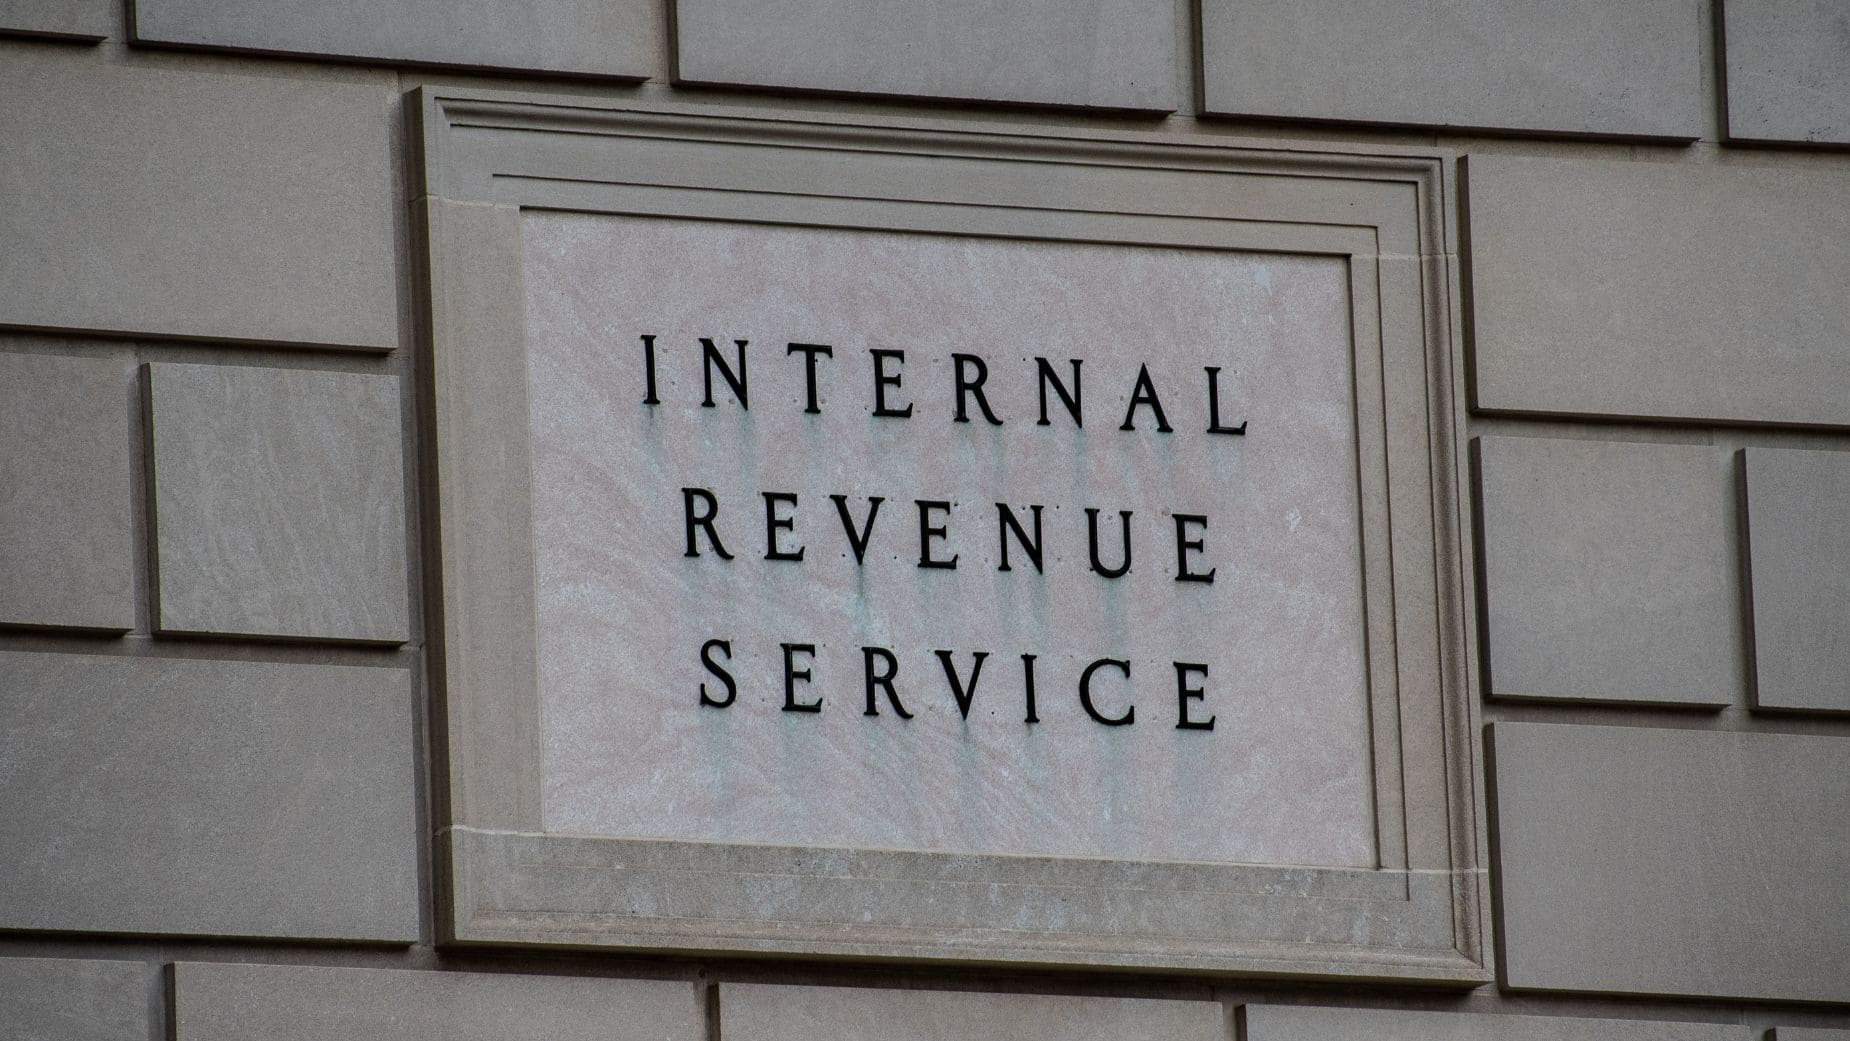 The IRS has new Tax Rules for Social Security users